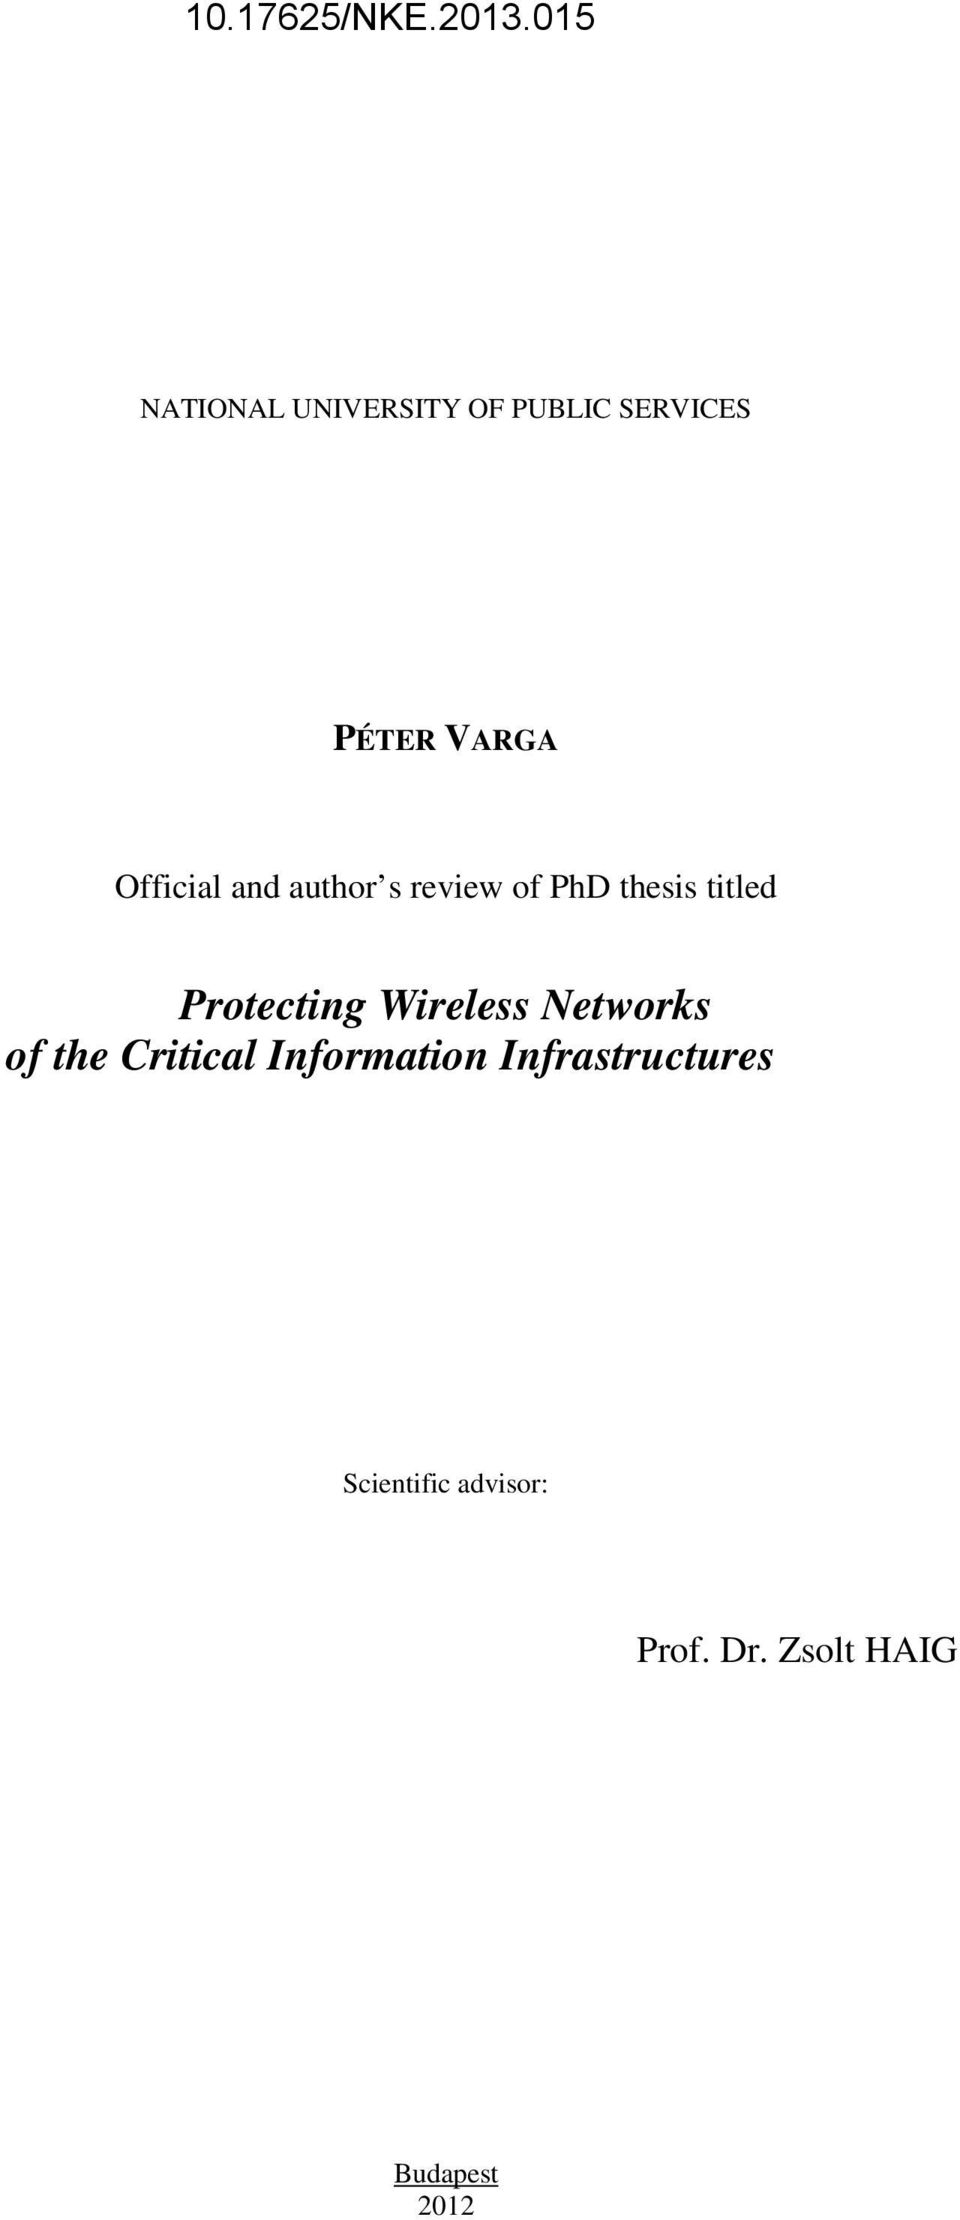 Protecting Wireless Networks of the Critical Information